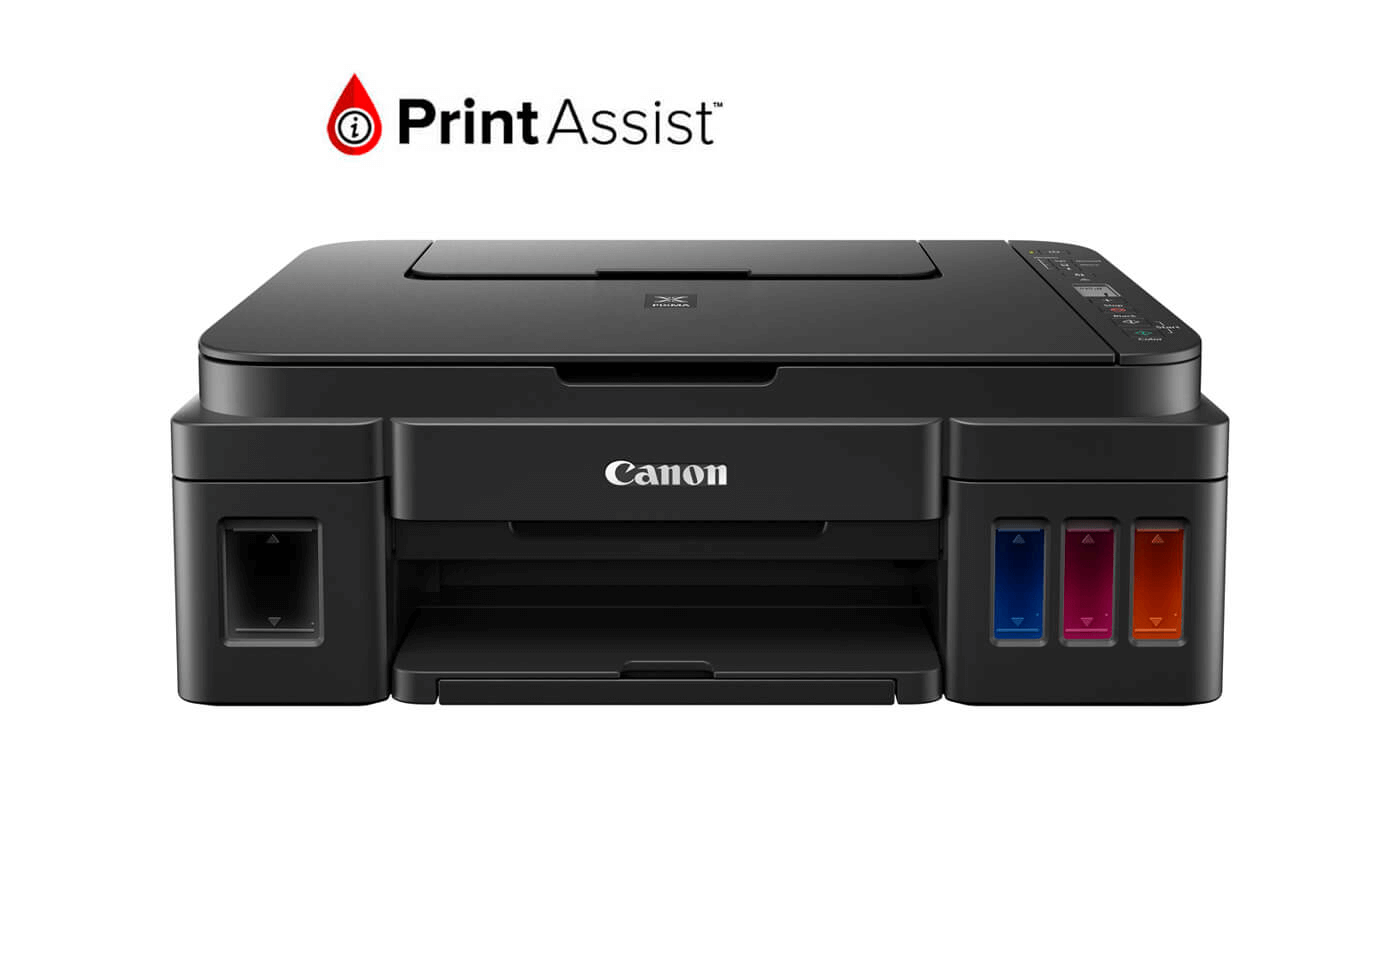 Image of PIXMA G3610 home printer with Print Assist